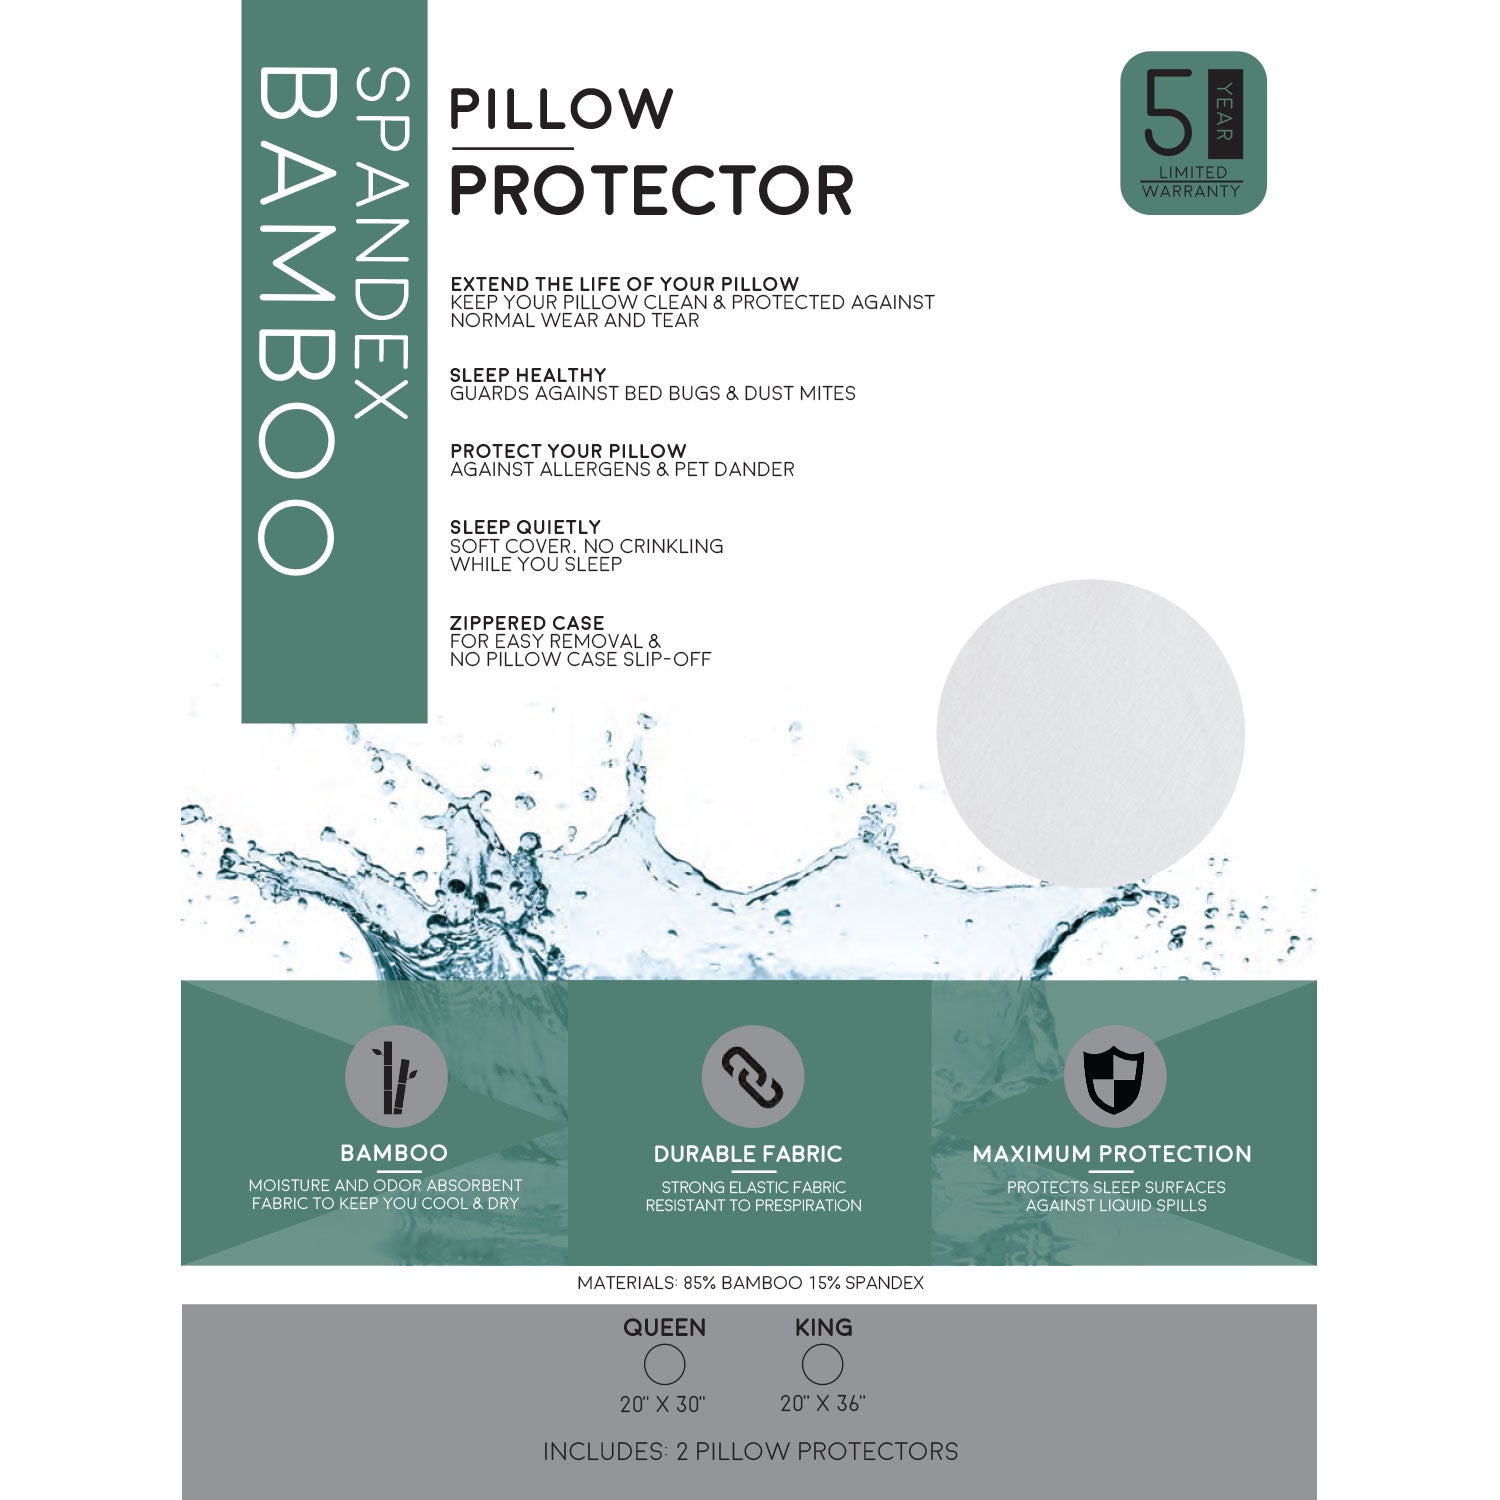 Premium Bamboo Pillow Protector - 100% Waterproof and Hypoallergenic Zipper Washable Cover - BlissfulNights.com